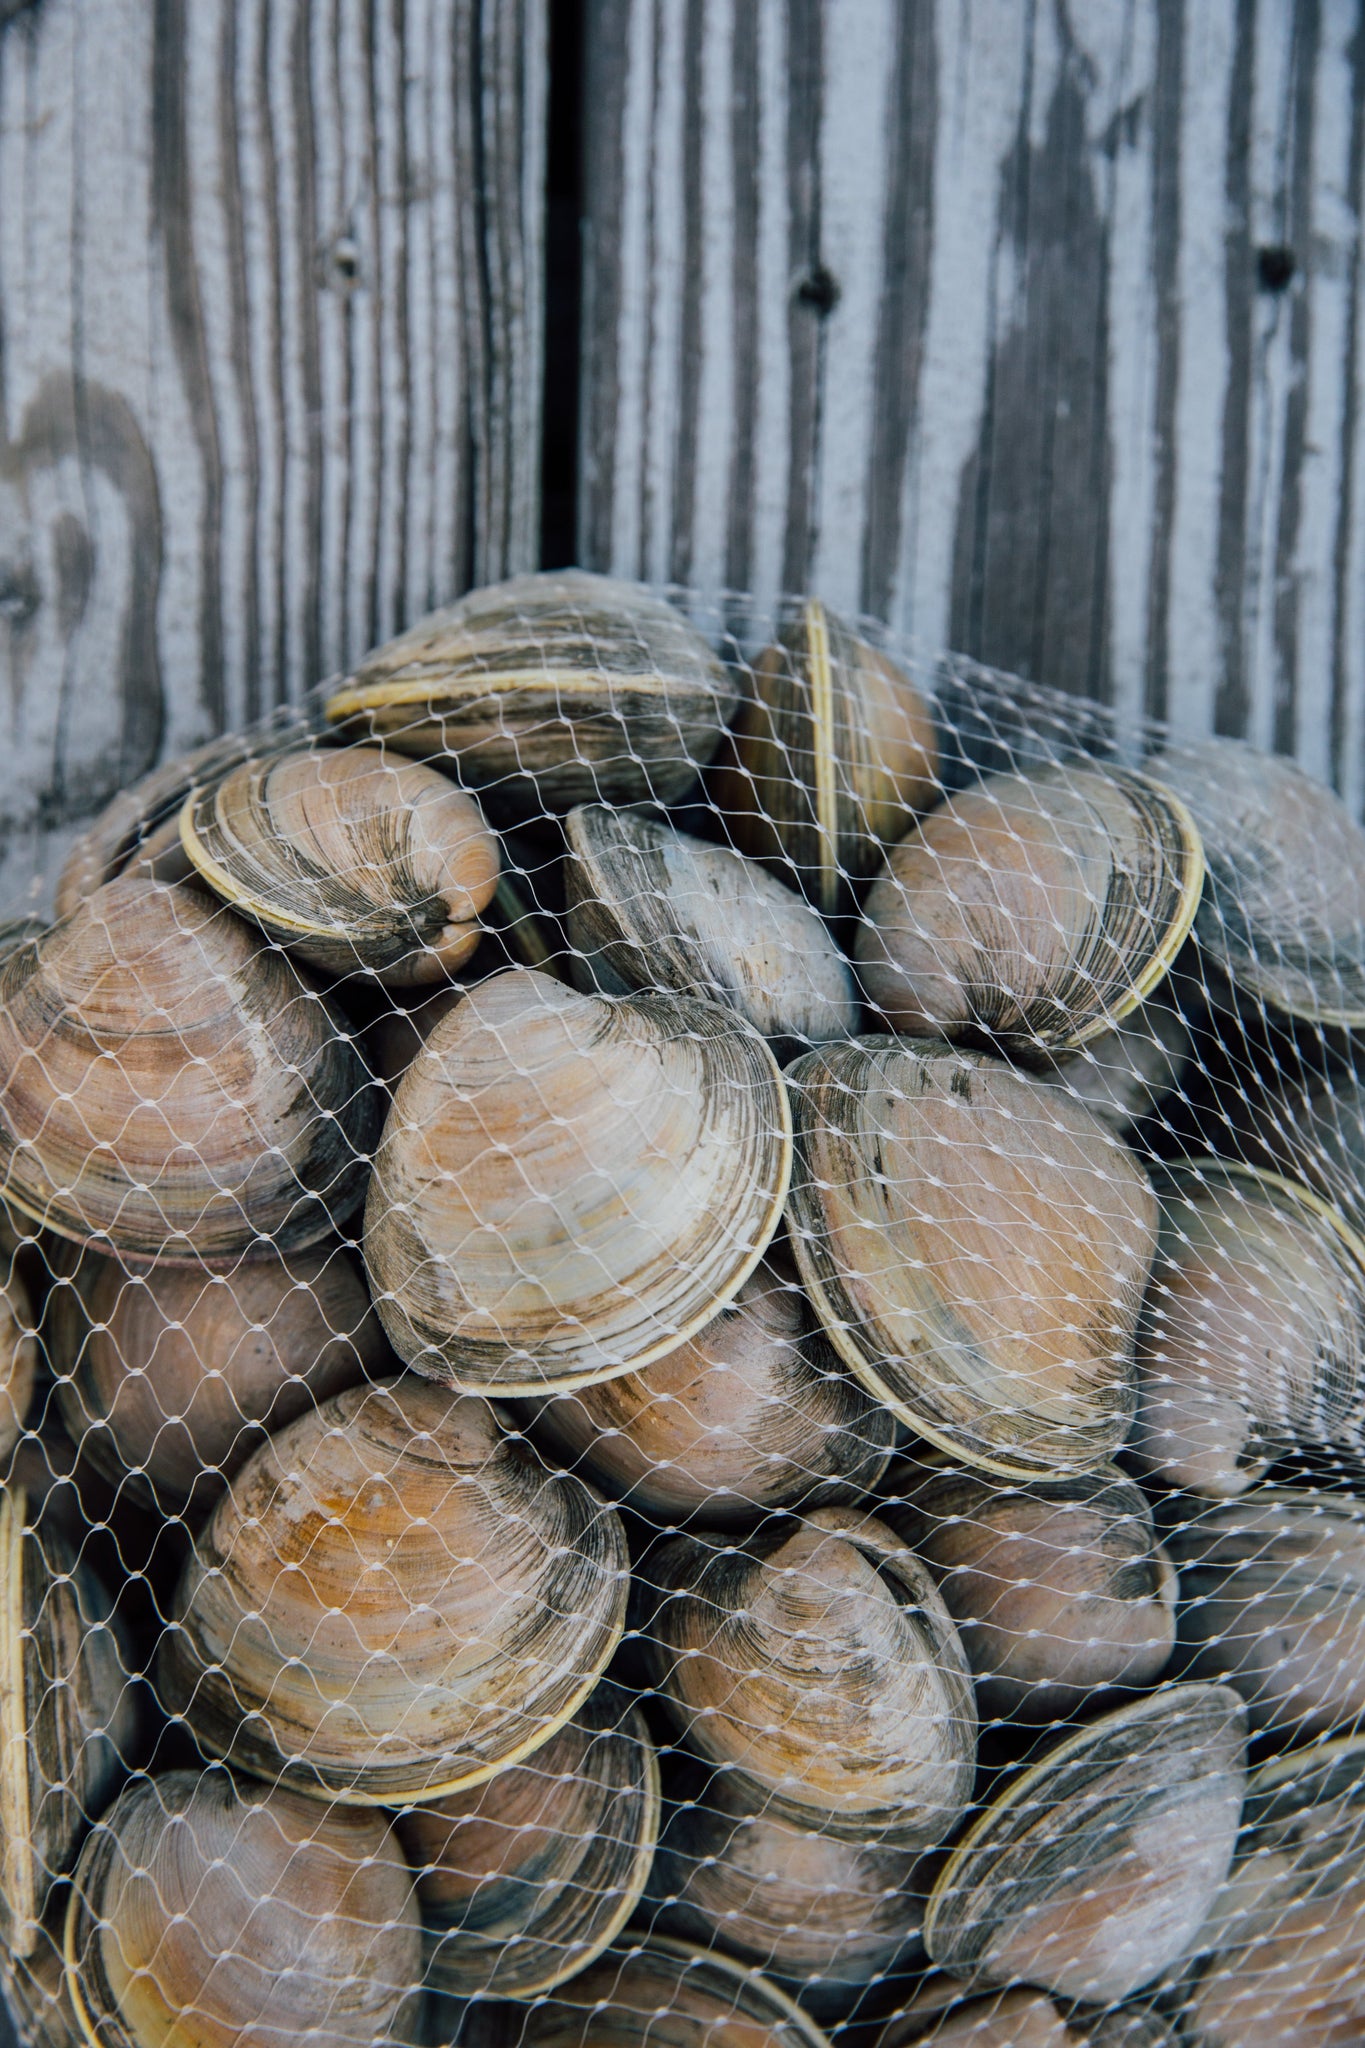 SALE: 25 Clams for $13!